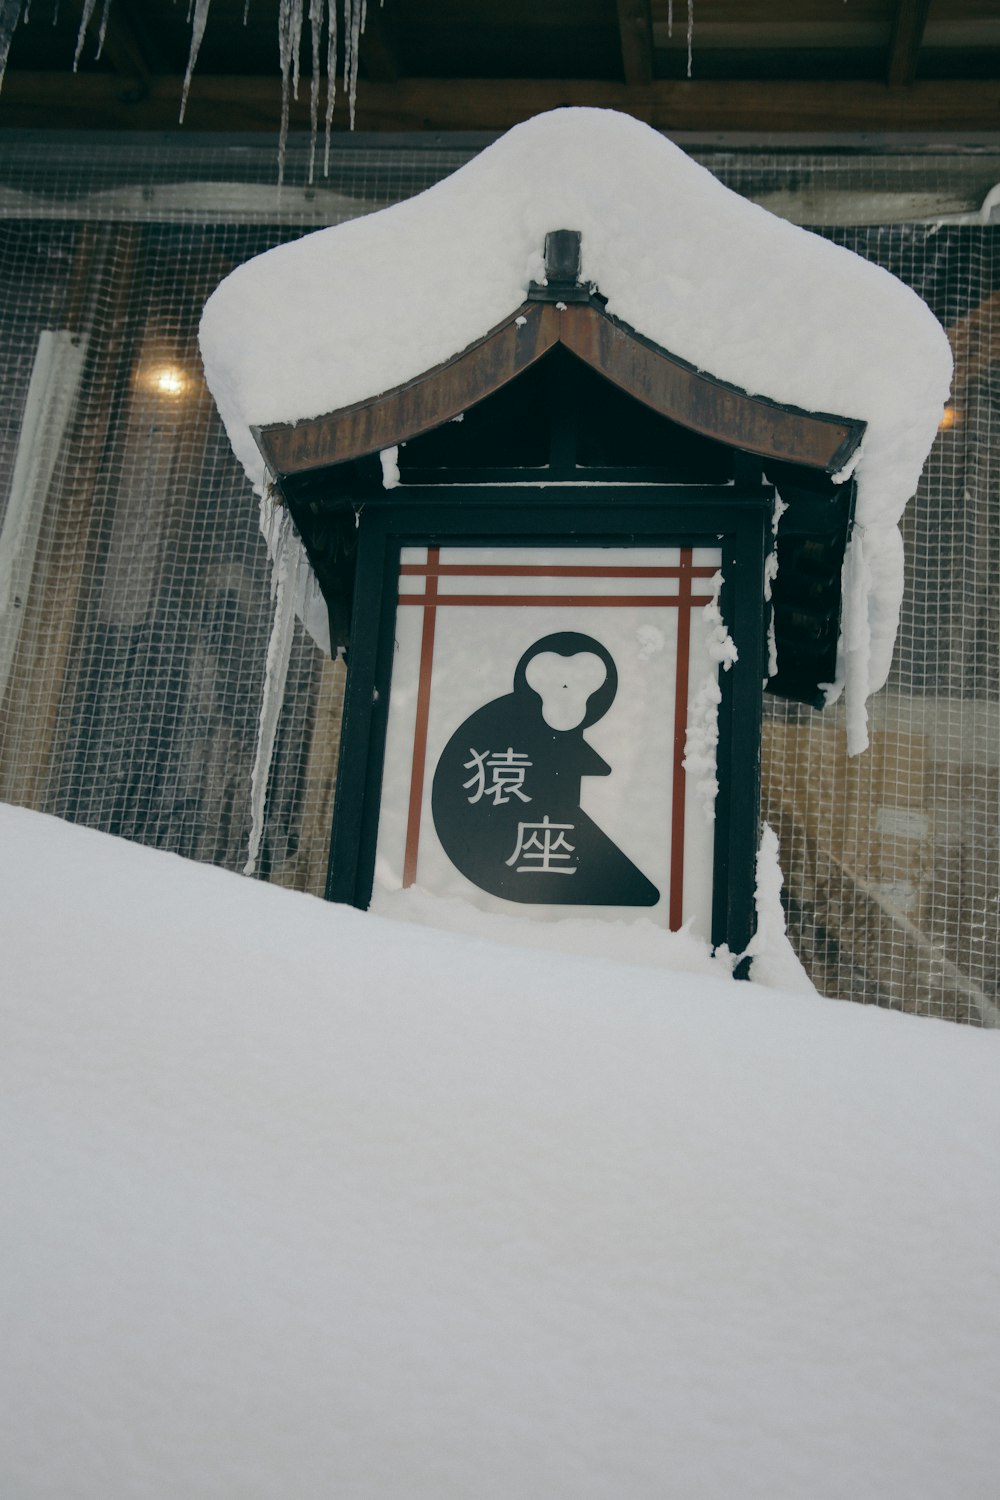 a sign covered in snow with icicles hanging from the roof